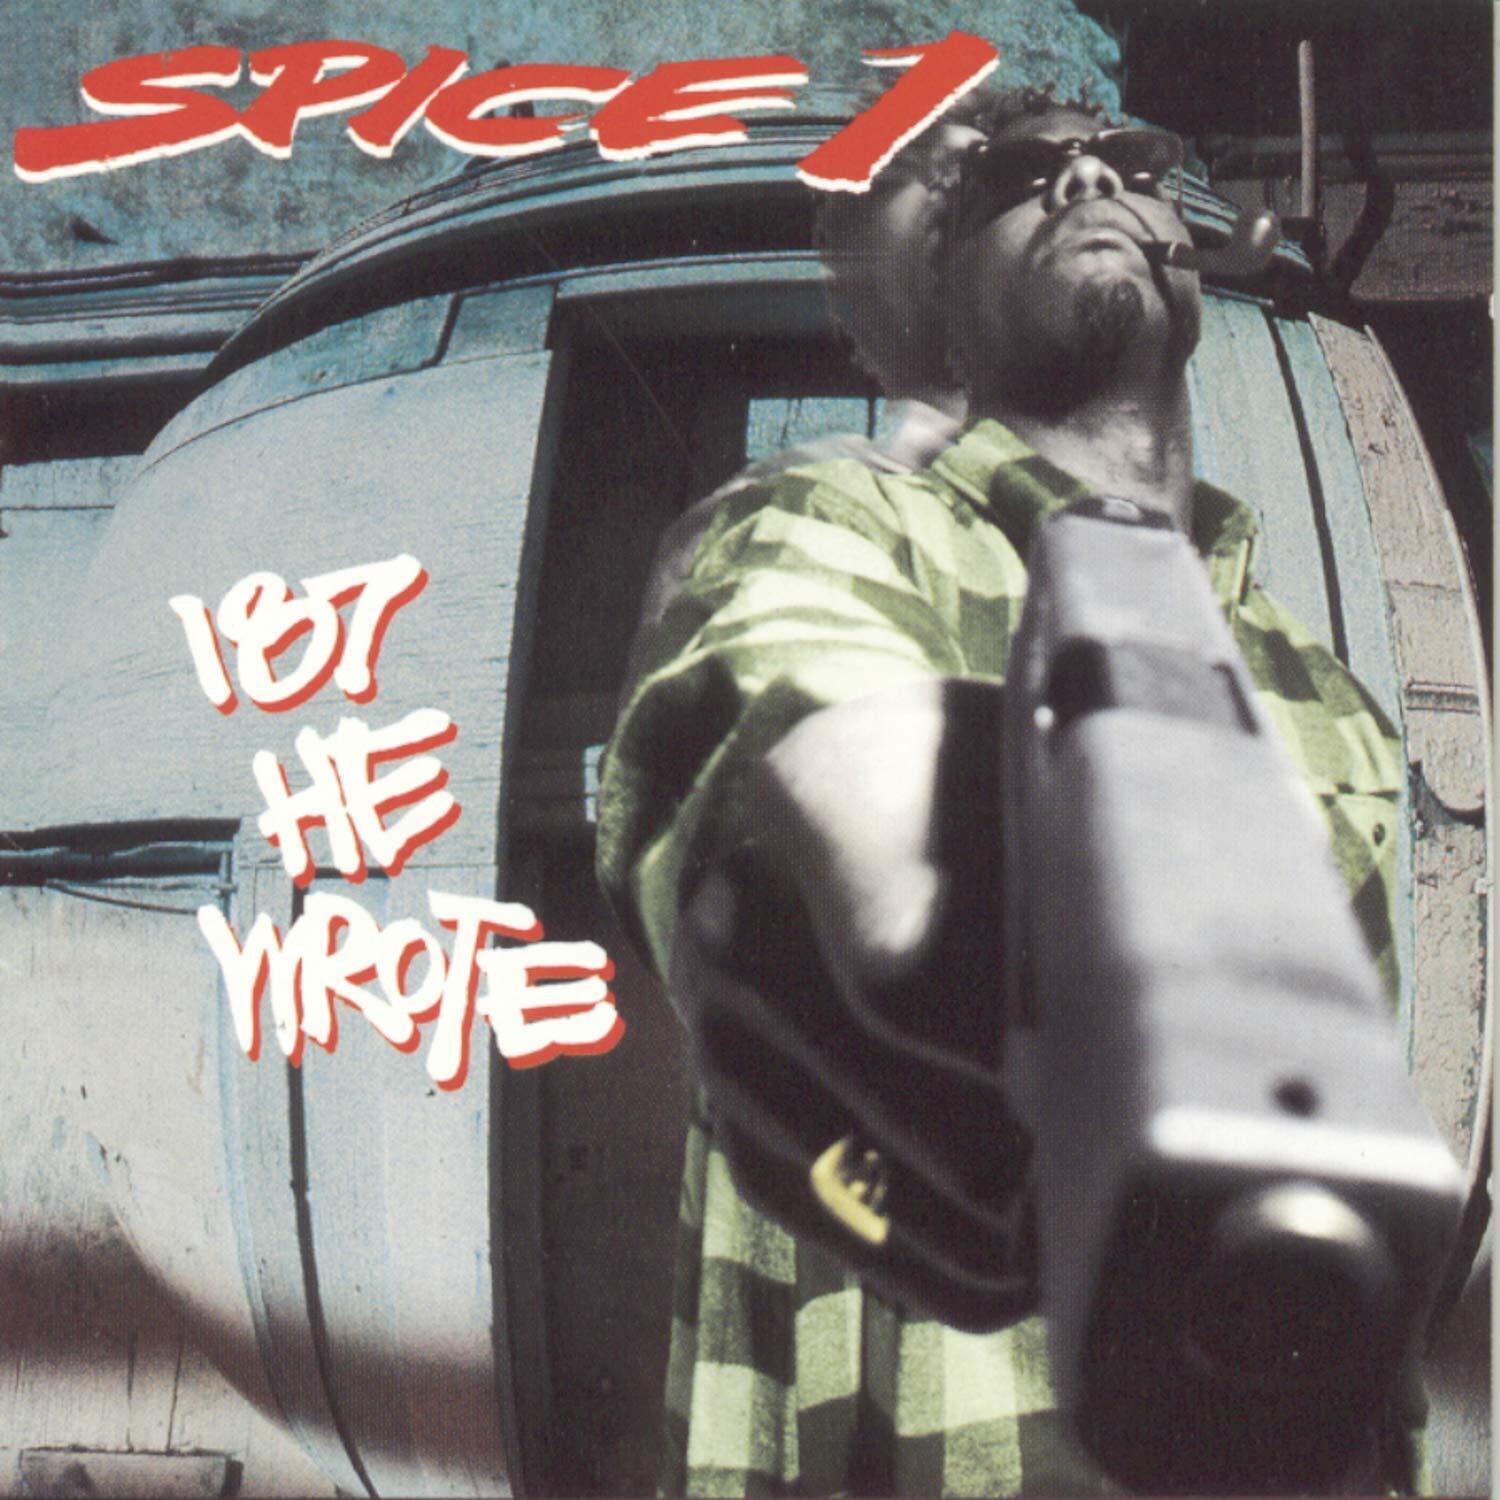 Spice 1 187 He Wrote (CD)